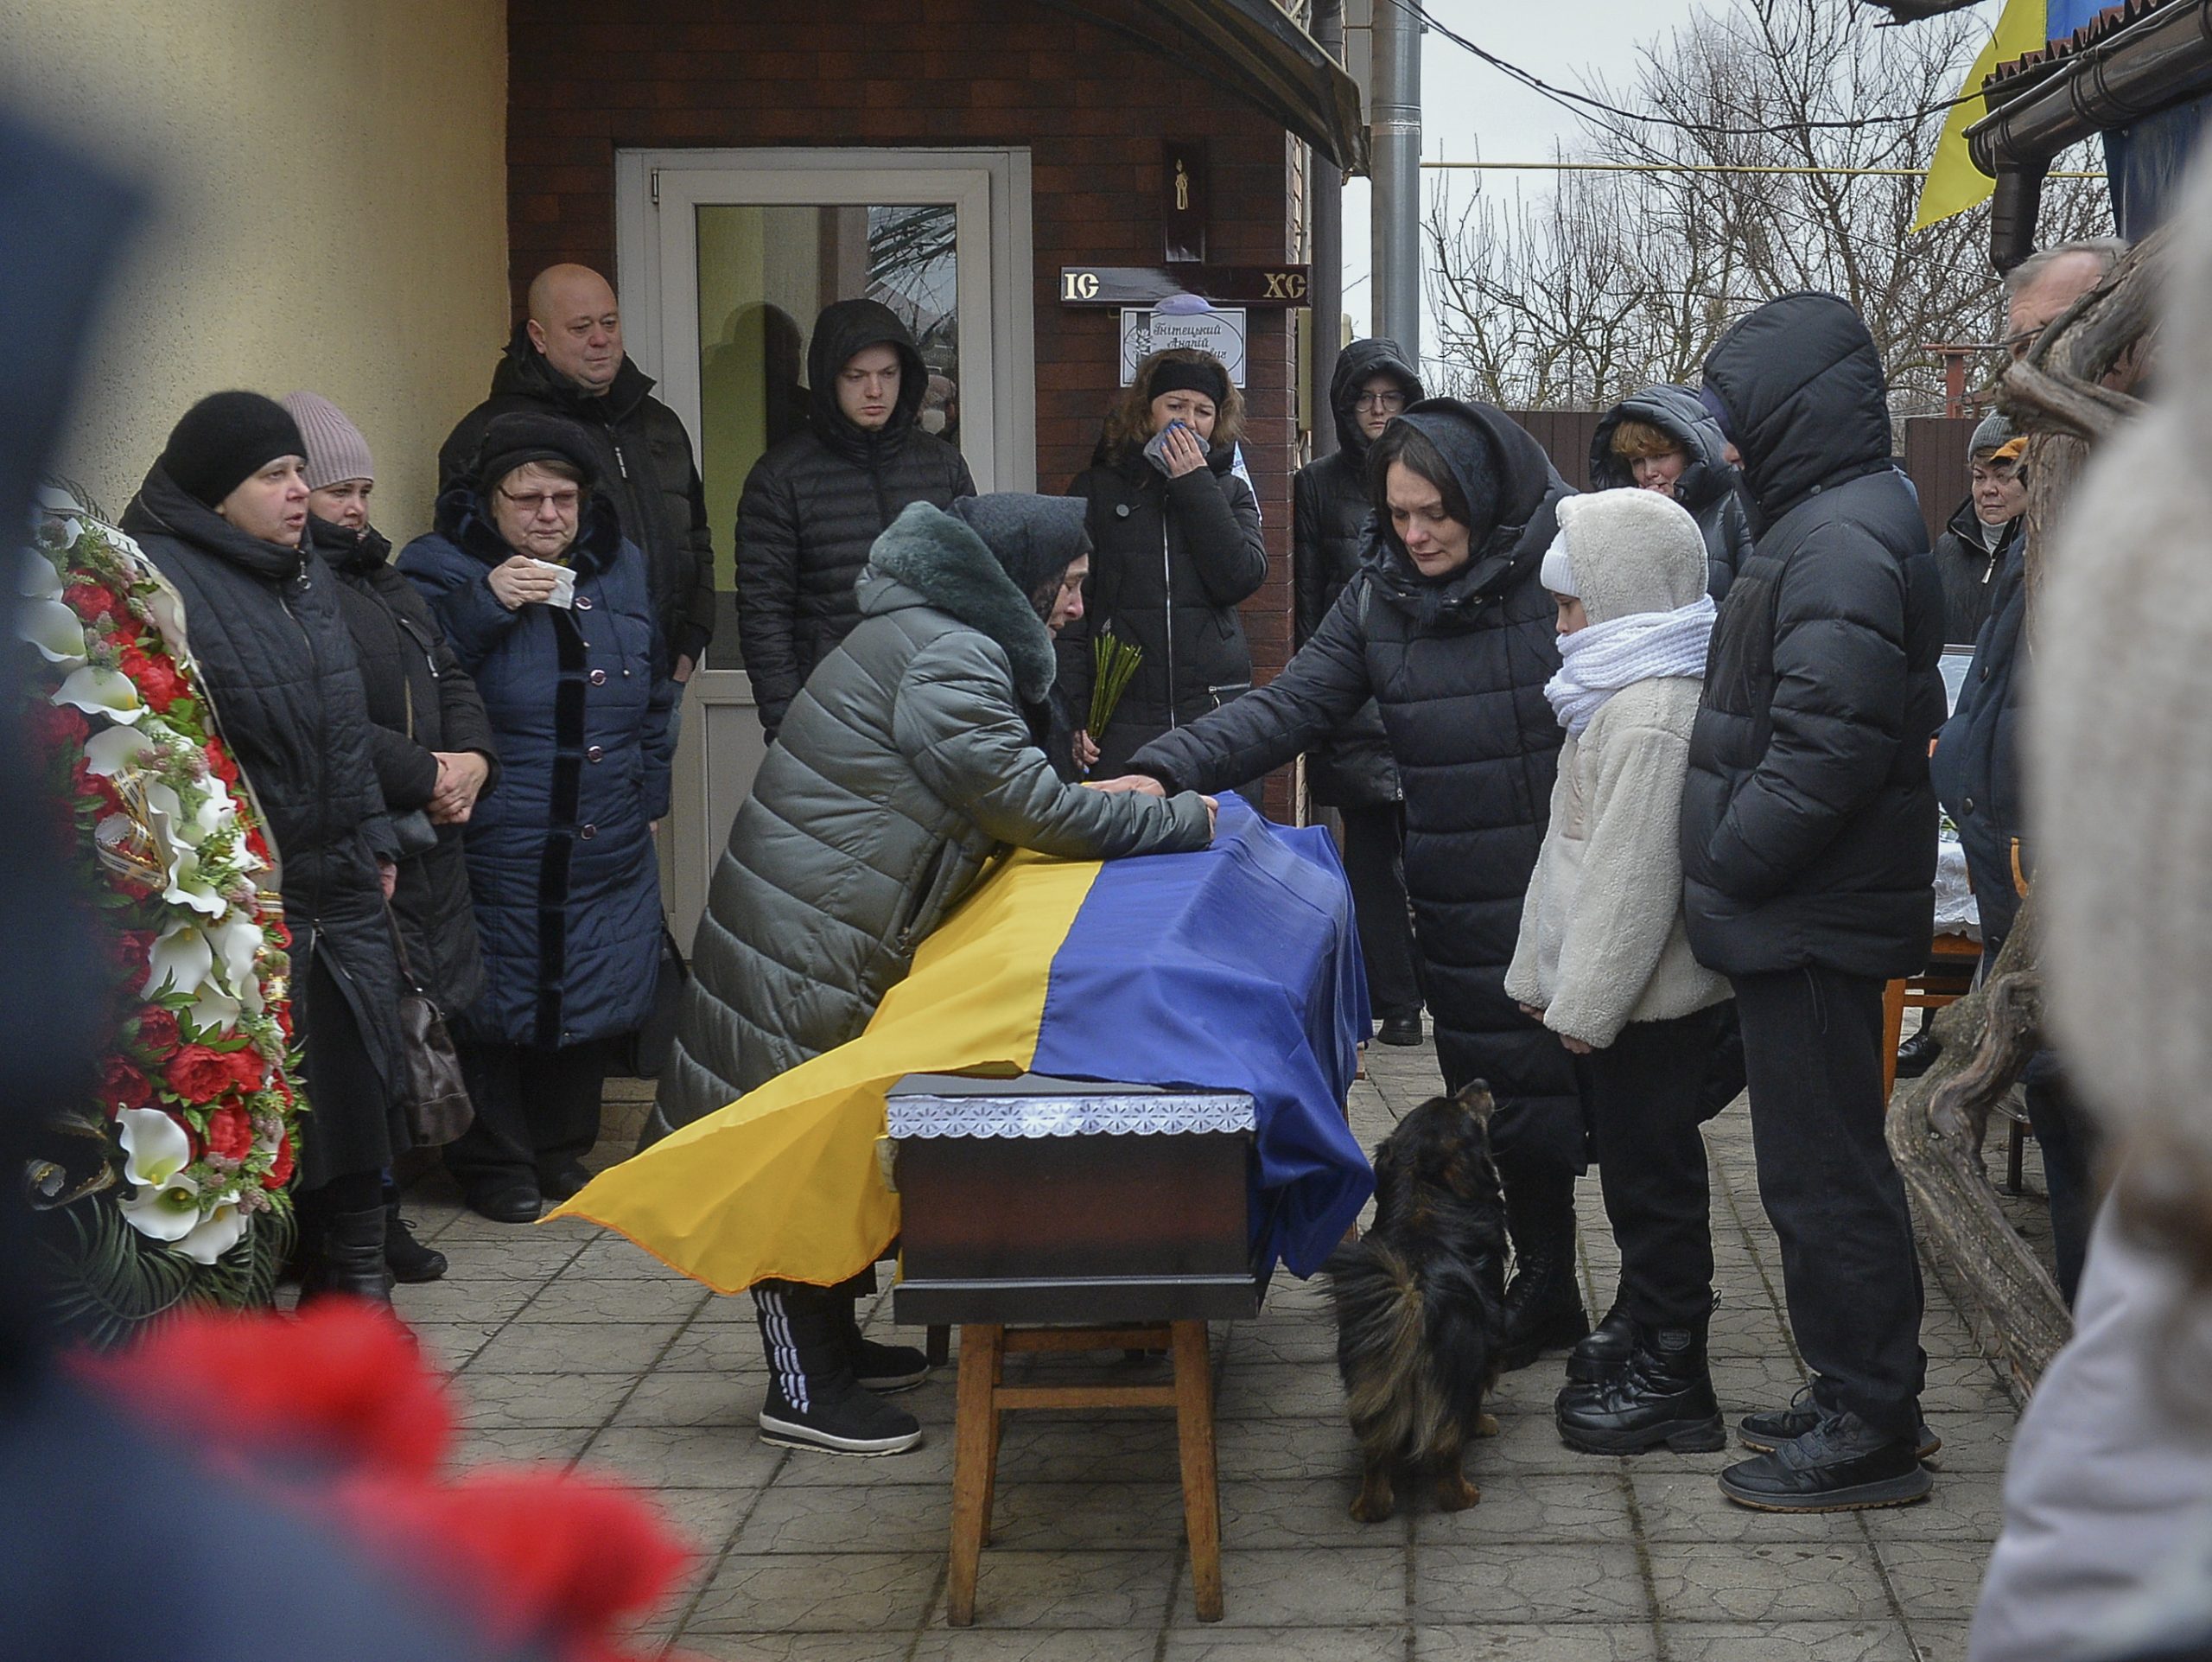 epa10465058 Relatives, friends, and comrades attend the funeral ceremony for Ukrainian serviceman Andriy Gnitetskiy, in Hostomel, near Kyiv (Kiev), Ukraine, 13 February 2023. Andriy Gnitetskiy was killed in fighting near the frontline city of Soledar, eastern Ukraine. Russian troops on 24 February 2022 entered Ukrainian territory, starting an armed conflict that has provoked destruction and a humanitarian crisis.  EPA/ANDRII NESTERENKO